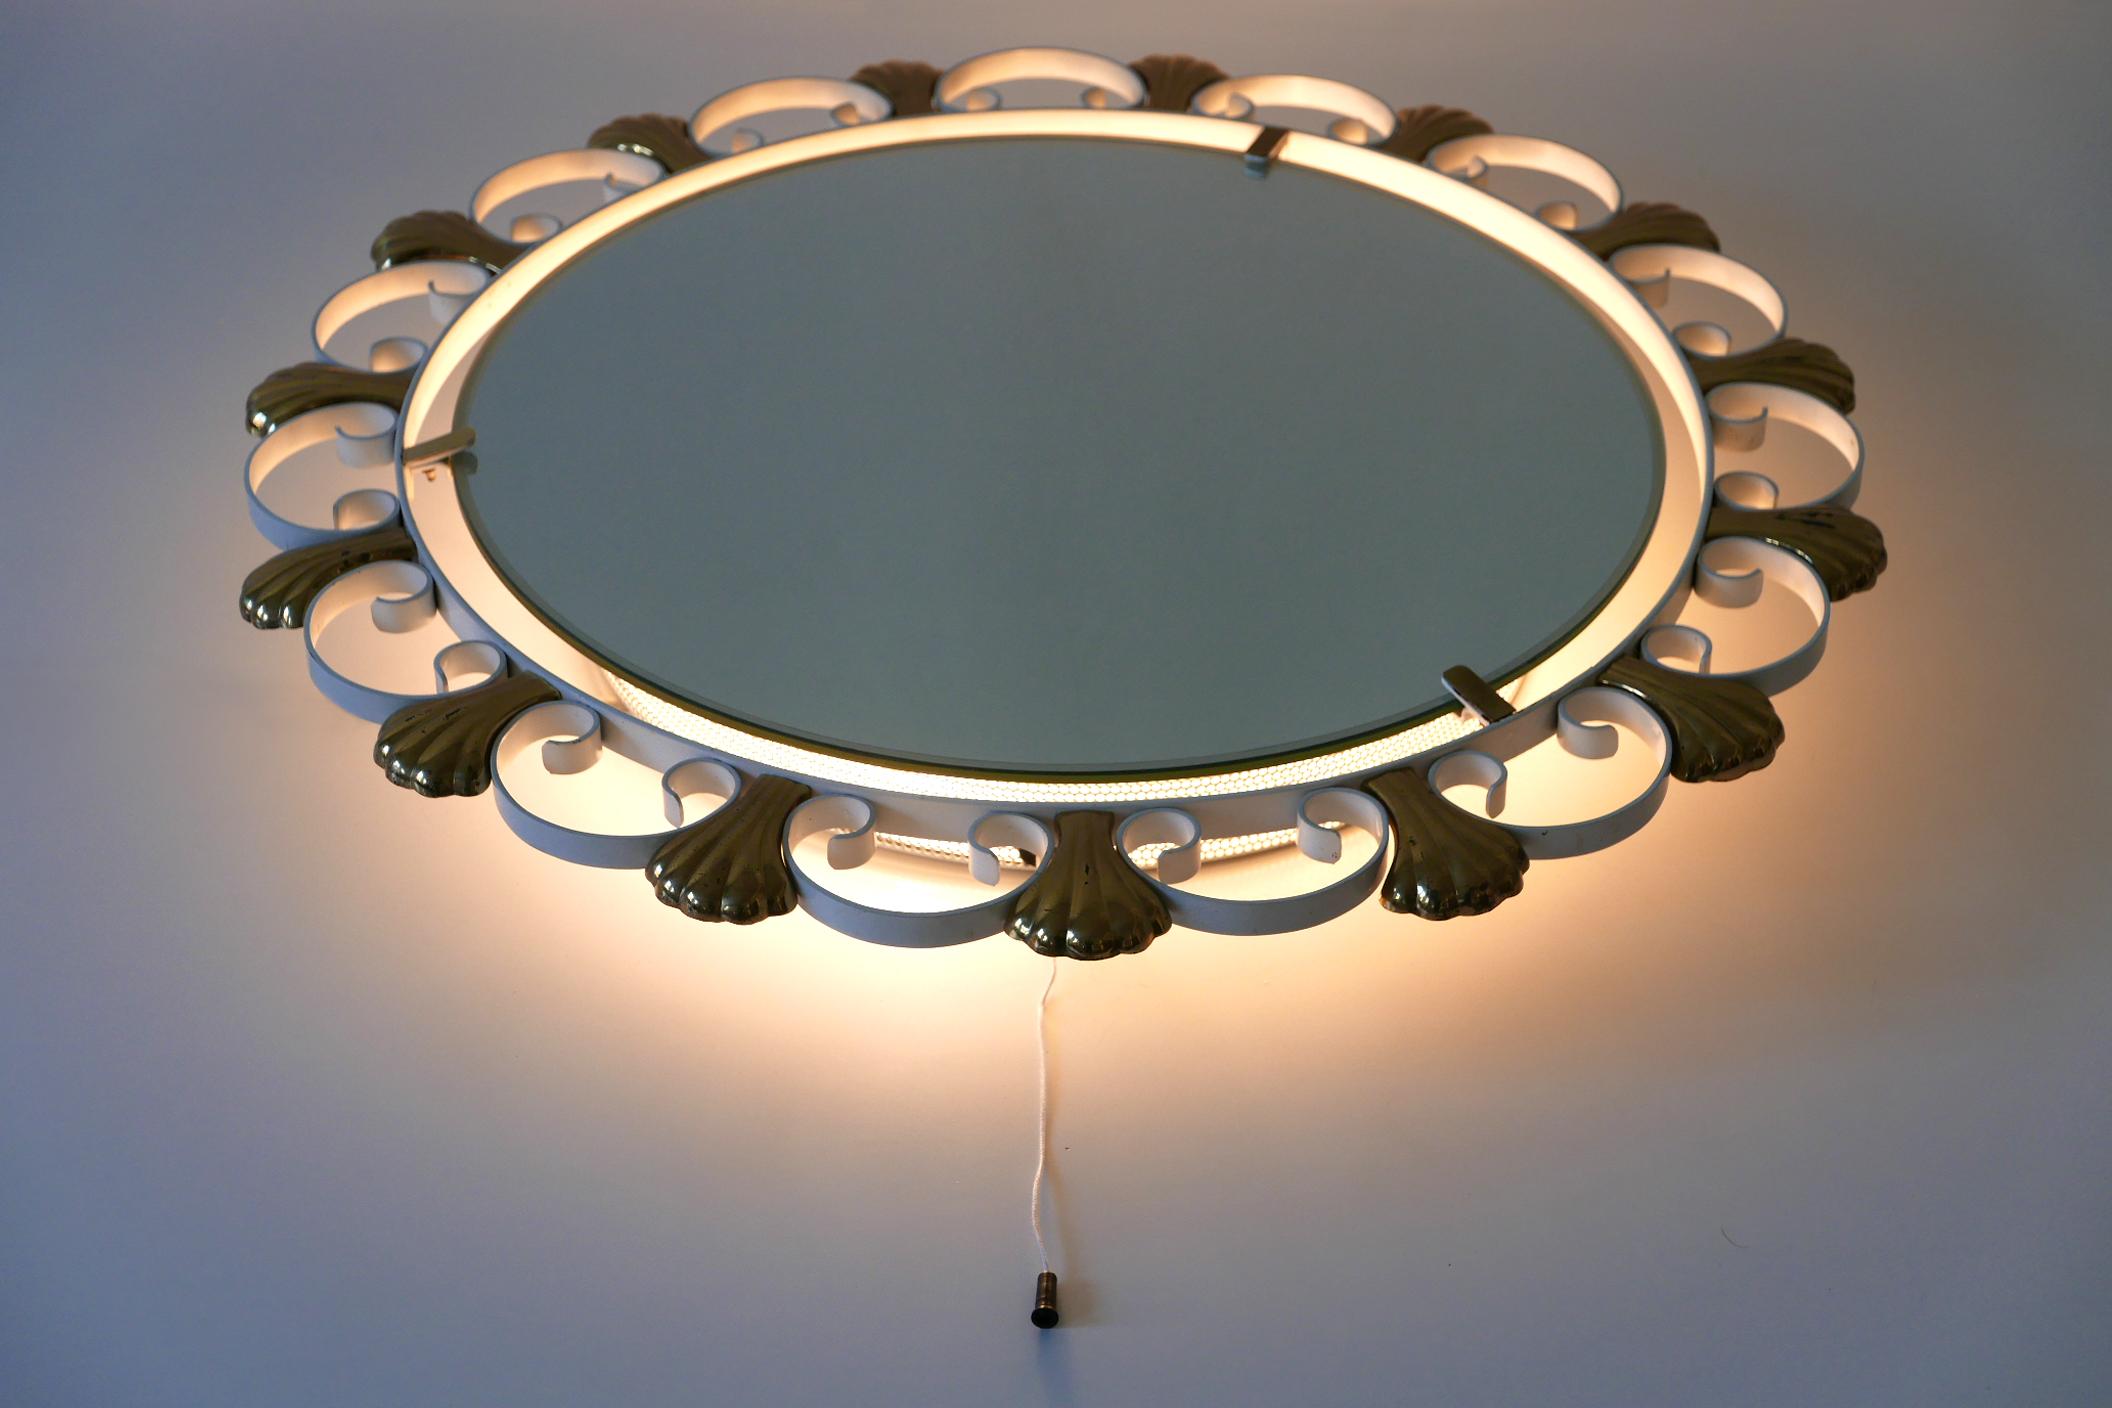 Elegant Mid-Century Modern Backlit Wall Mirror by Hillebrand, 1960s, Germany For Sale 11